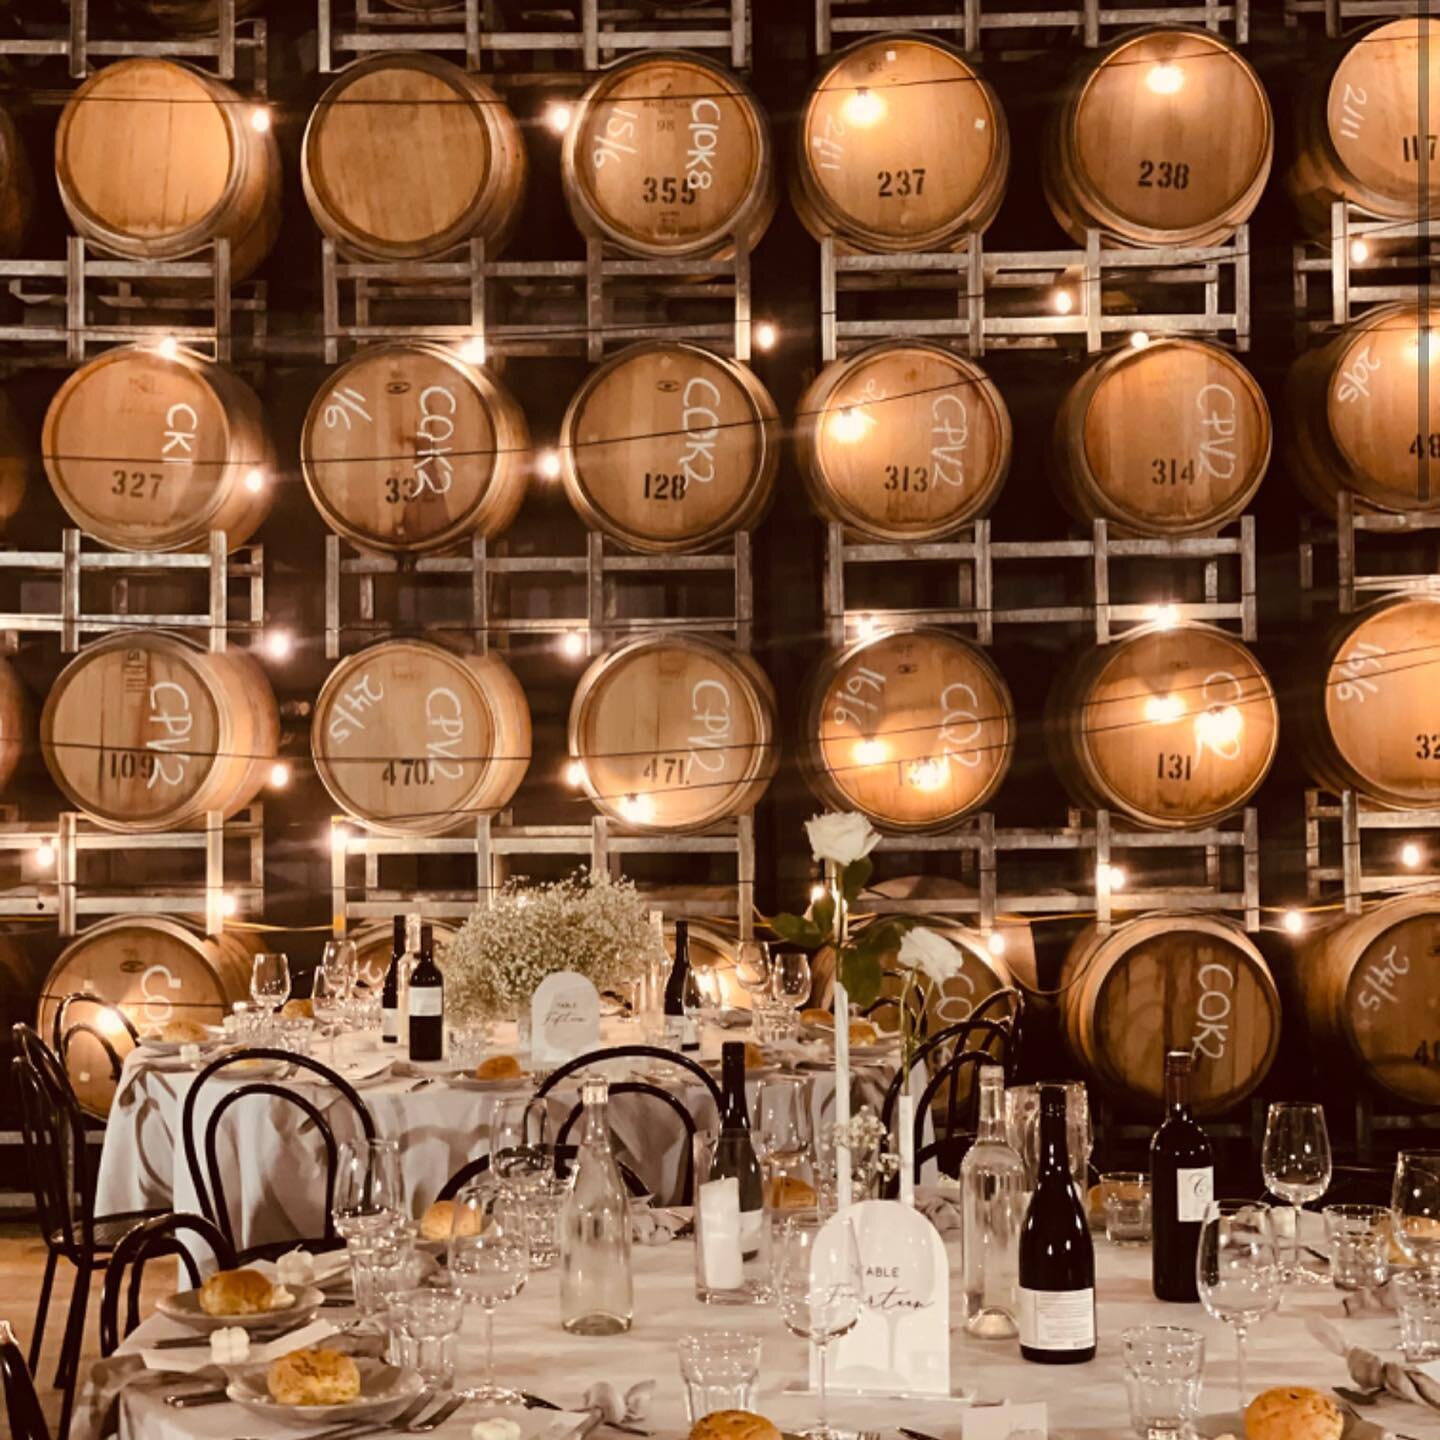 Palmers Lane Wine Eco Trail: Calais Estate

✔ family-owned and operated
✔ boutique small-batch winery

Let us introduce you to Calais Estate!

Calais Estate is a family-owned and operated boutique winery in the Hunter Valley. They pride themselves on